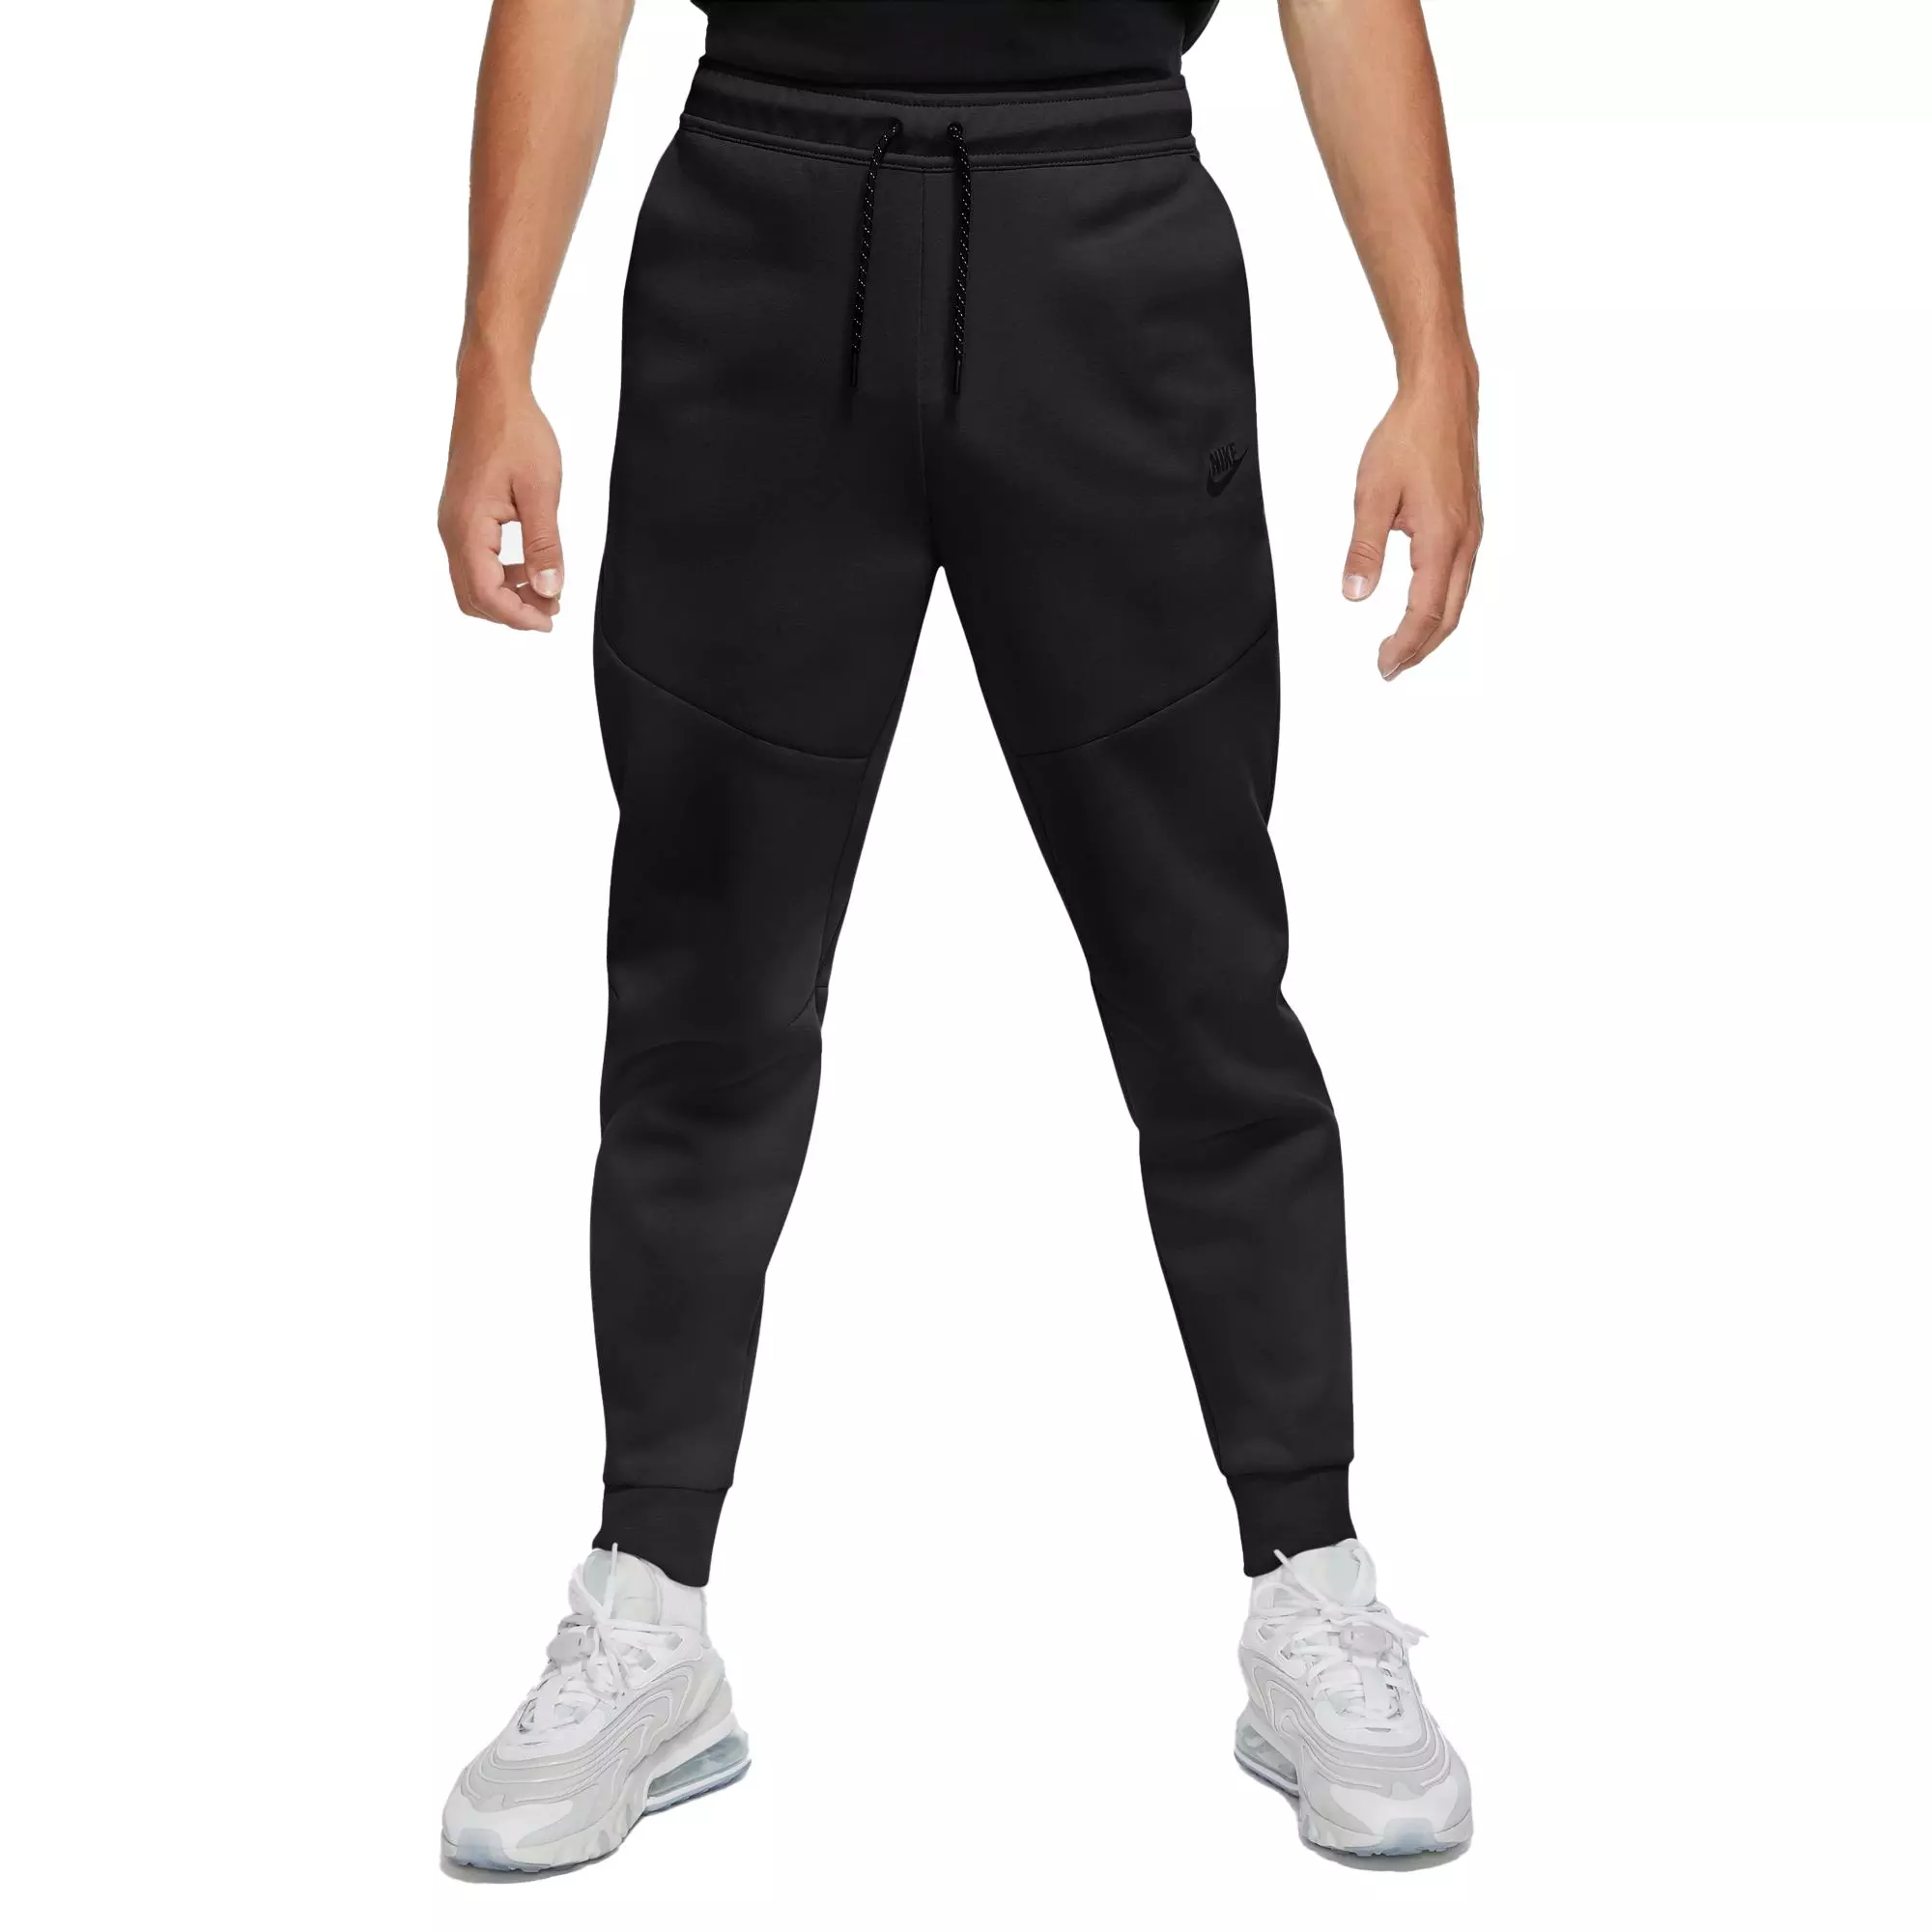 From Gym to The Streets, Nike Tech Fleece Does It All